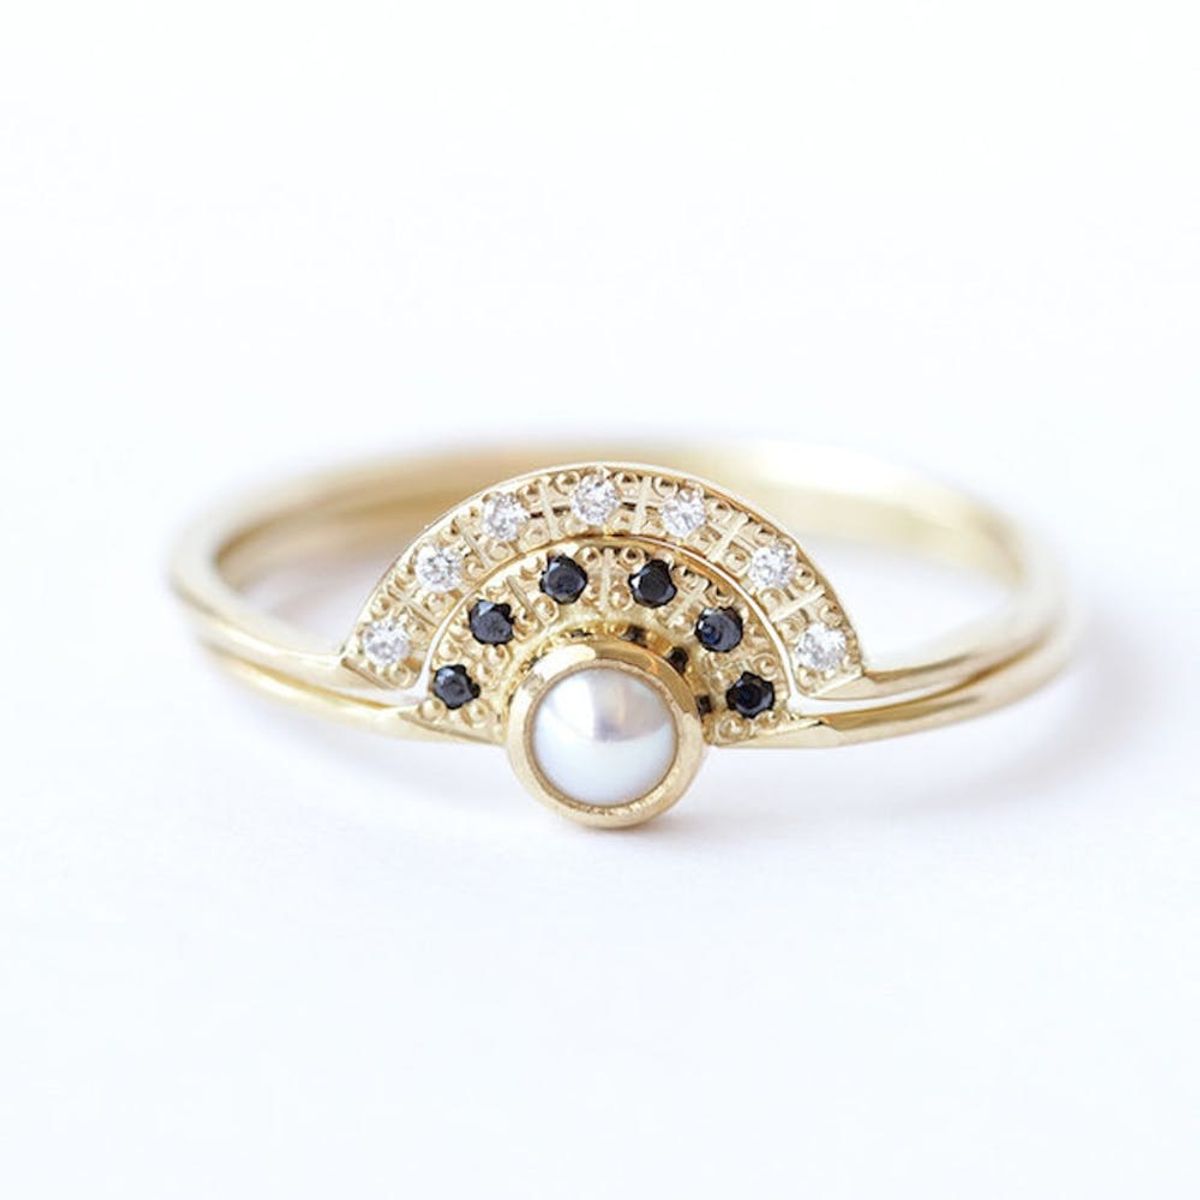 10 Modern Pearl Engagement Rings That Aren’t Your Grandmother’s